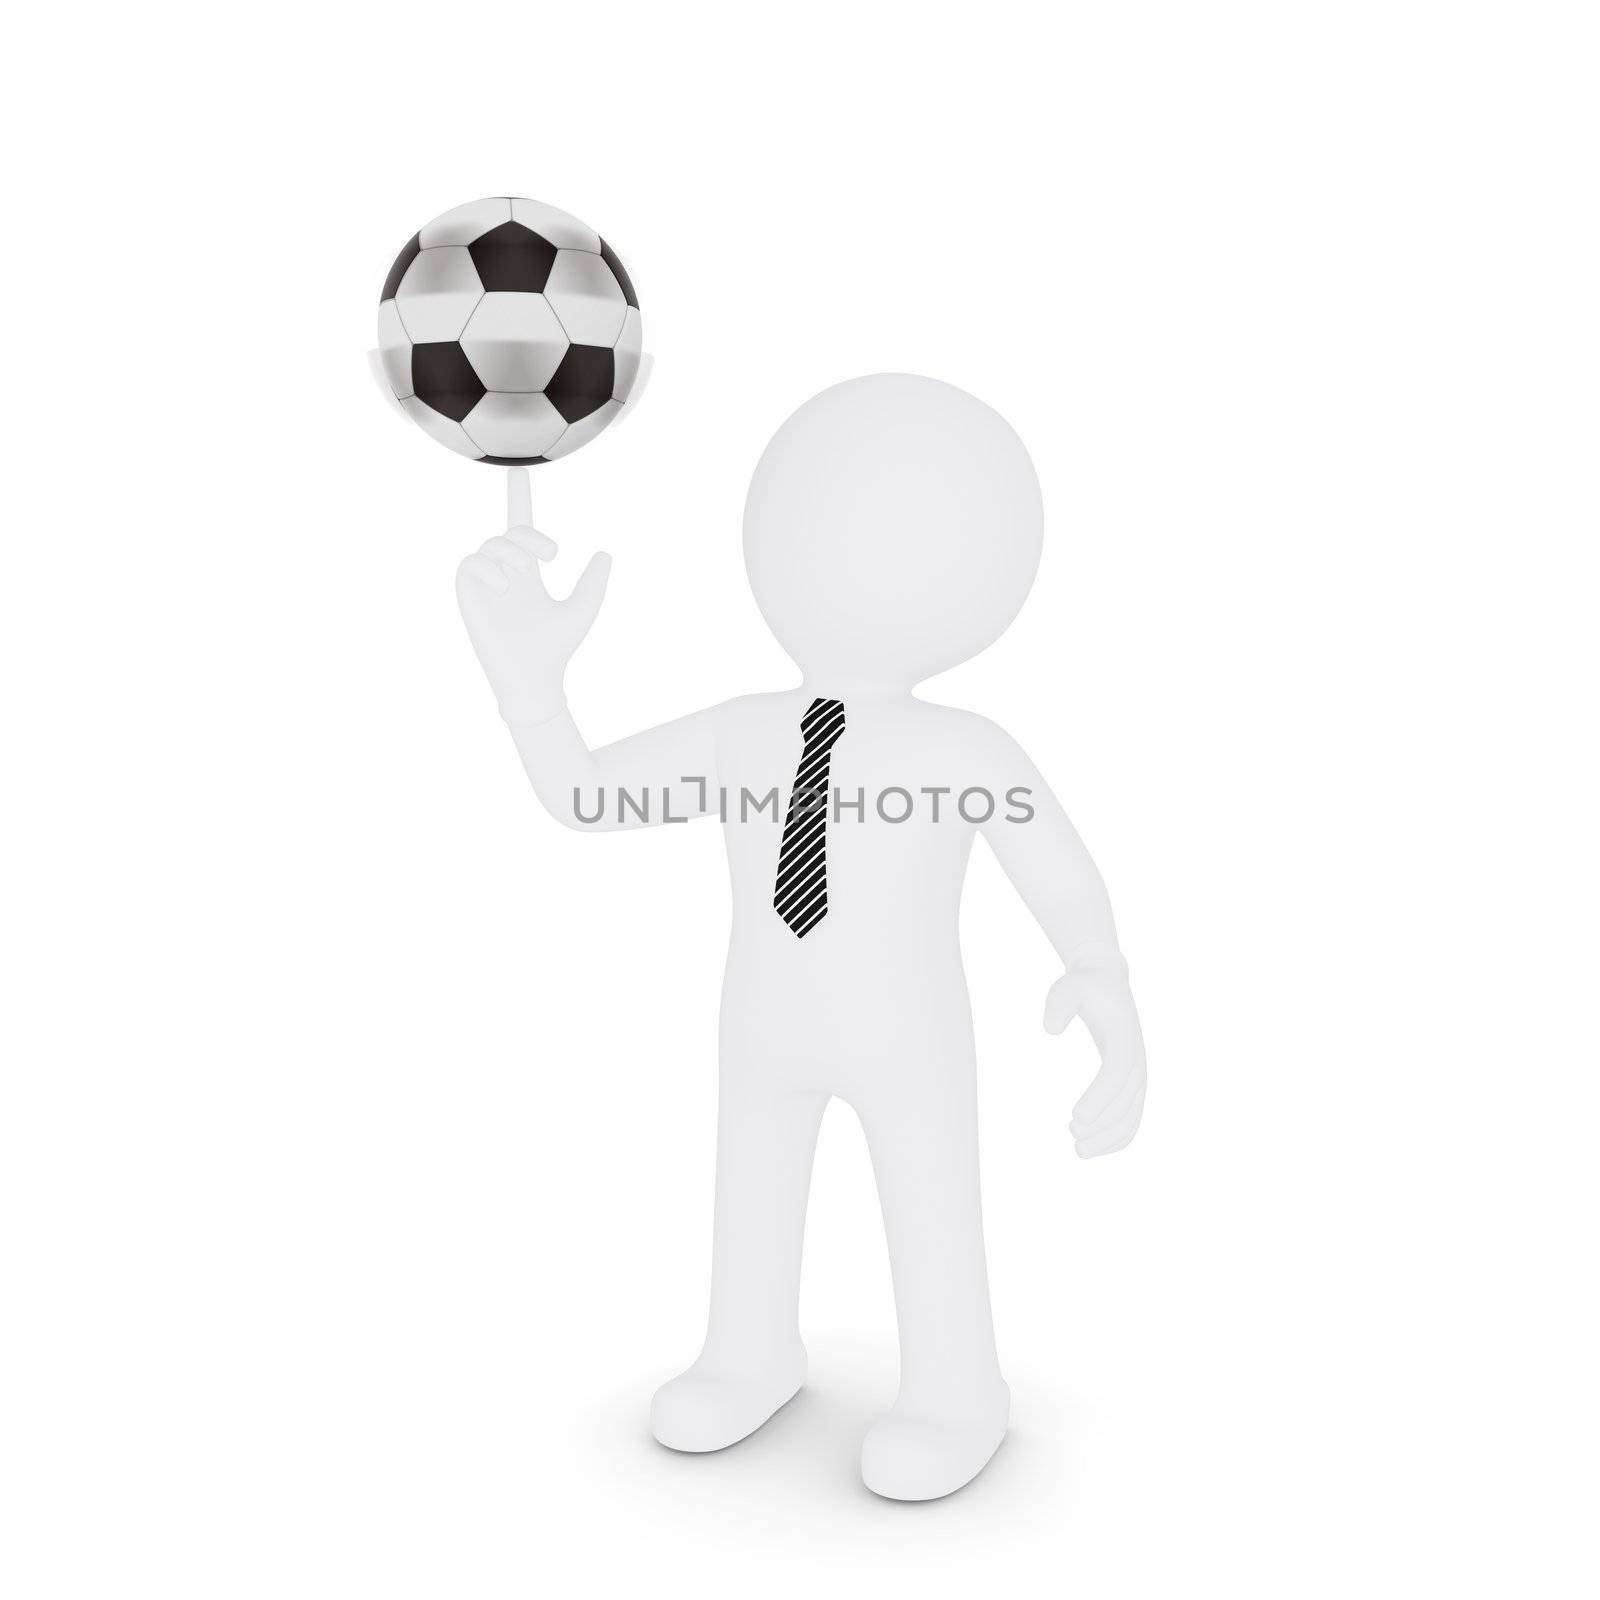 The white man turns on his finger football. Isolated on white background